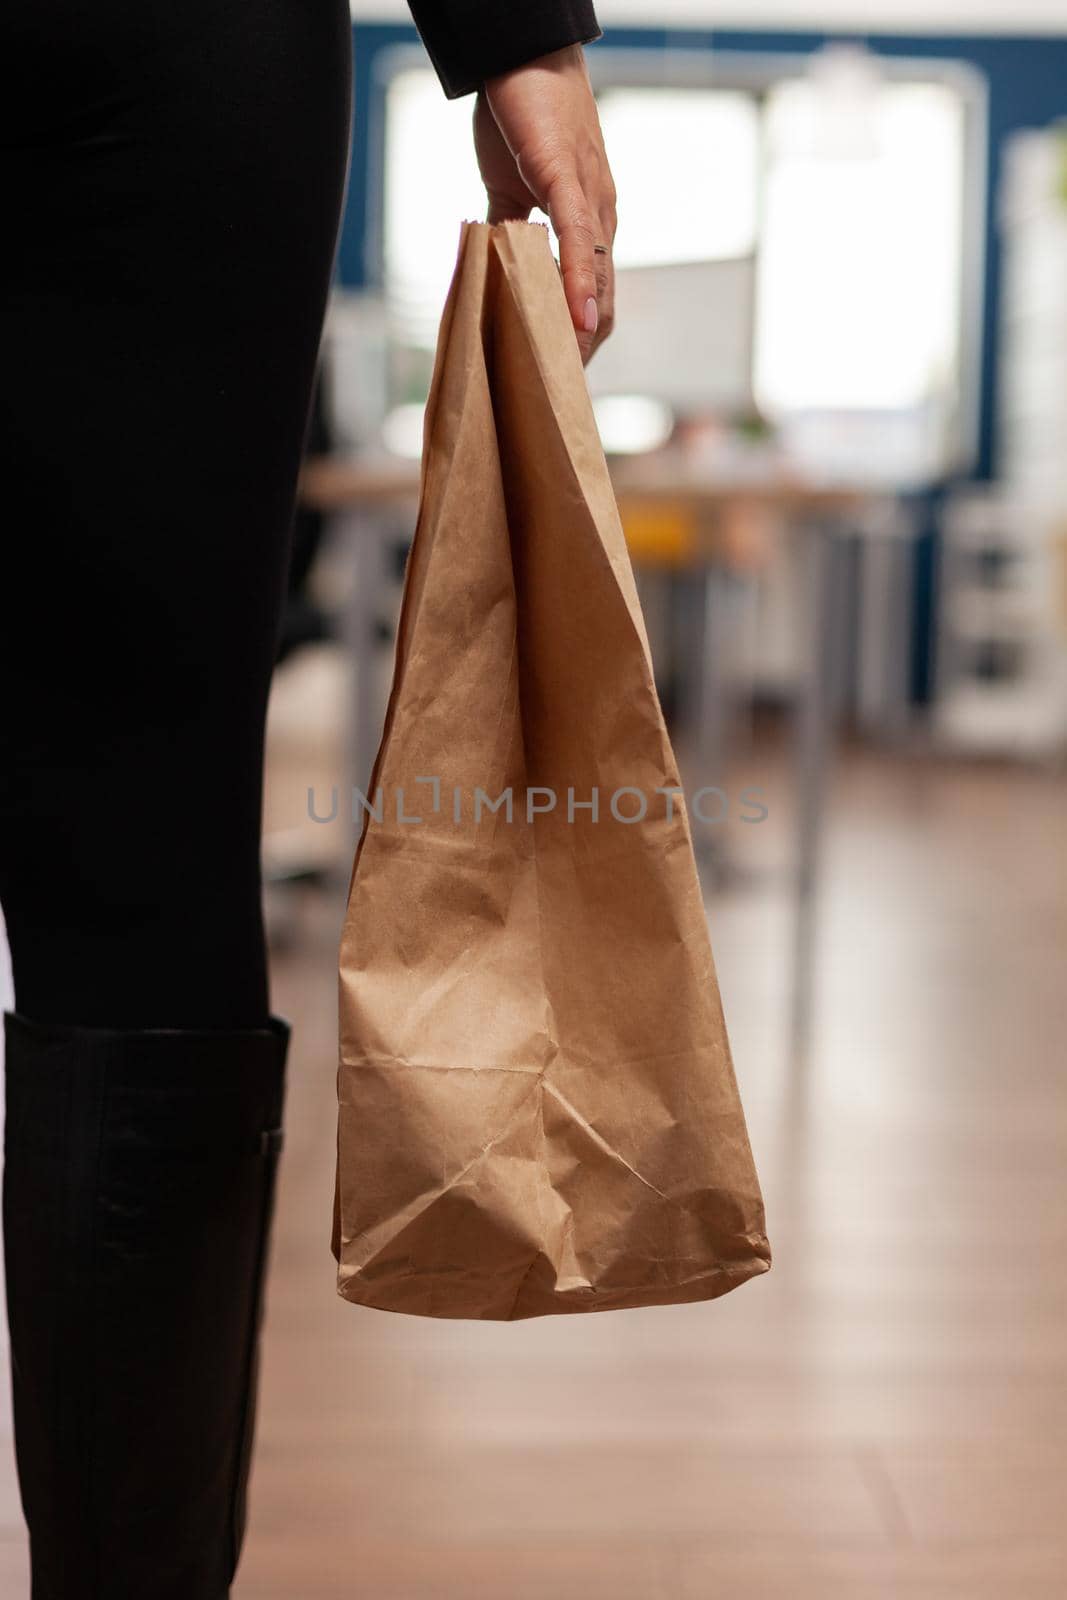 Businesswoman holding delivery takeaway food meal order paper bag during takeout lunchtime by DCStudio